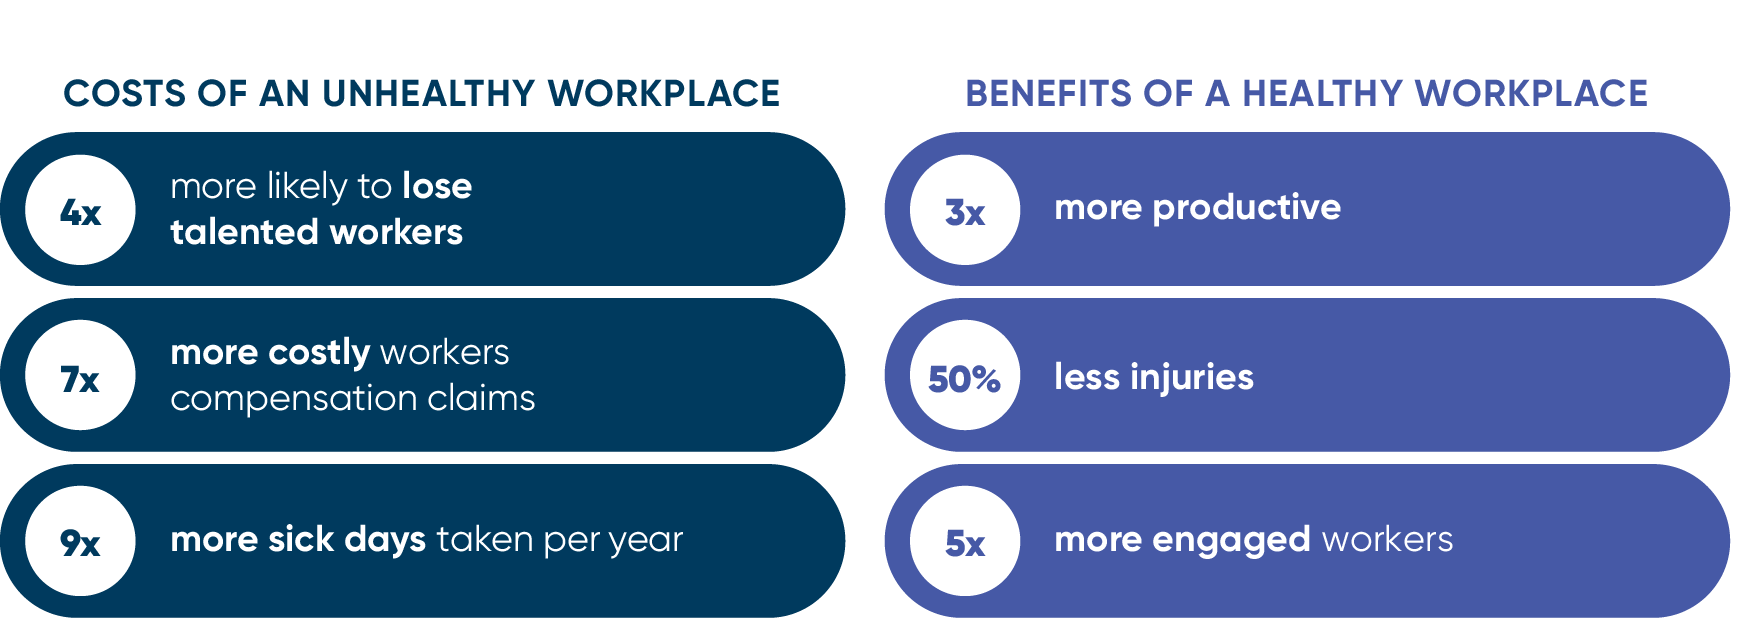 Costs of an unhealthy workplace: 4x more likely to lose talented workers; 7x more costly workers compensation claims; 9x more sick days taken per year. Benefits of a healthy workplace: 3 x more productive; 50% less injuries; 5x more engaged workers.